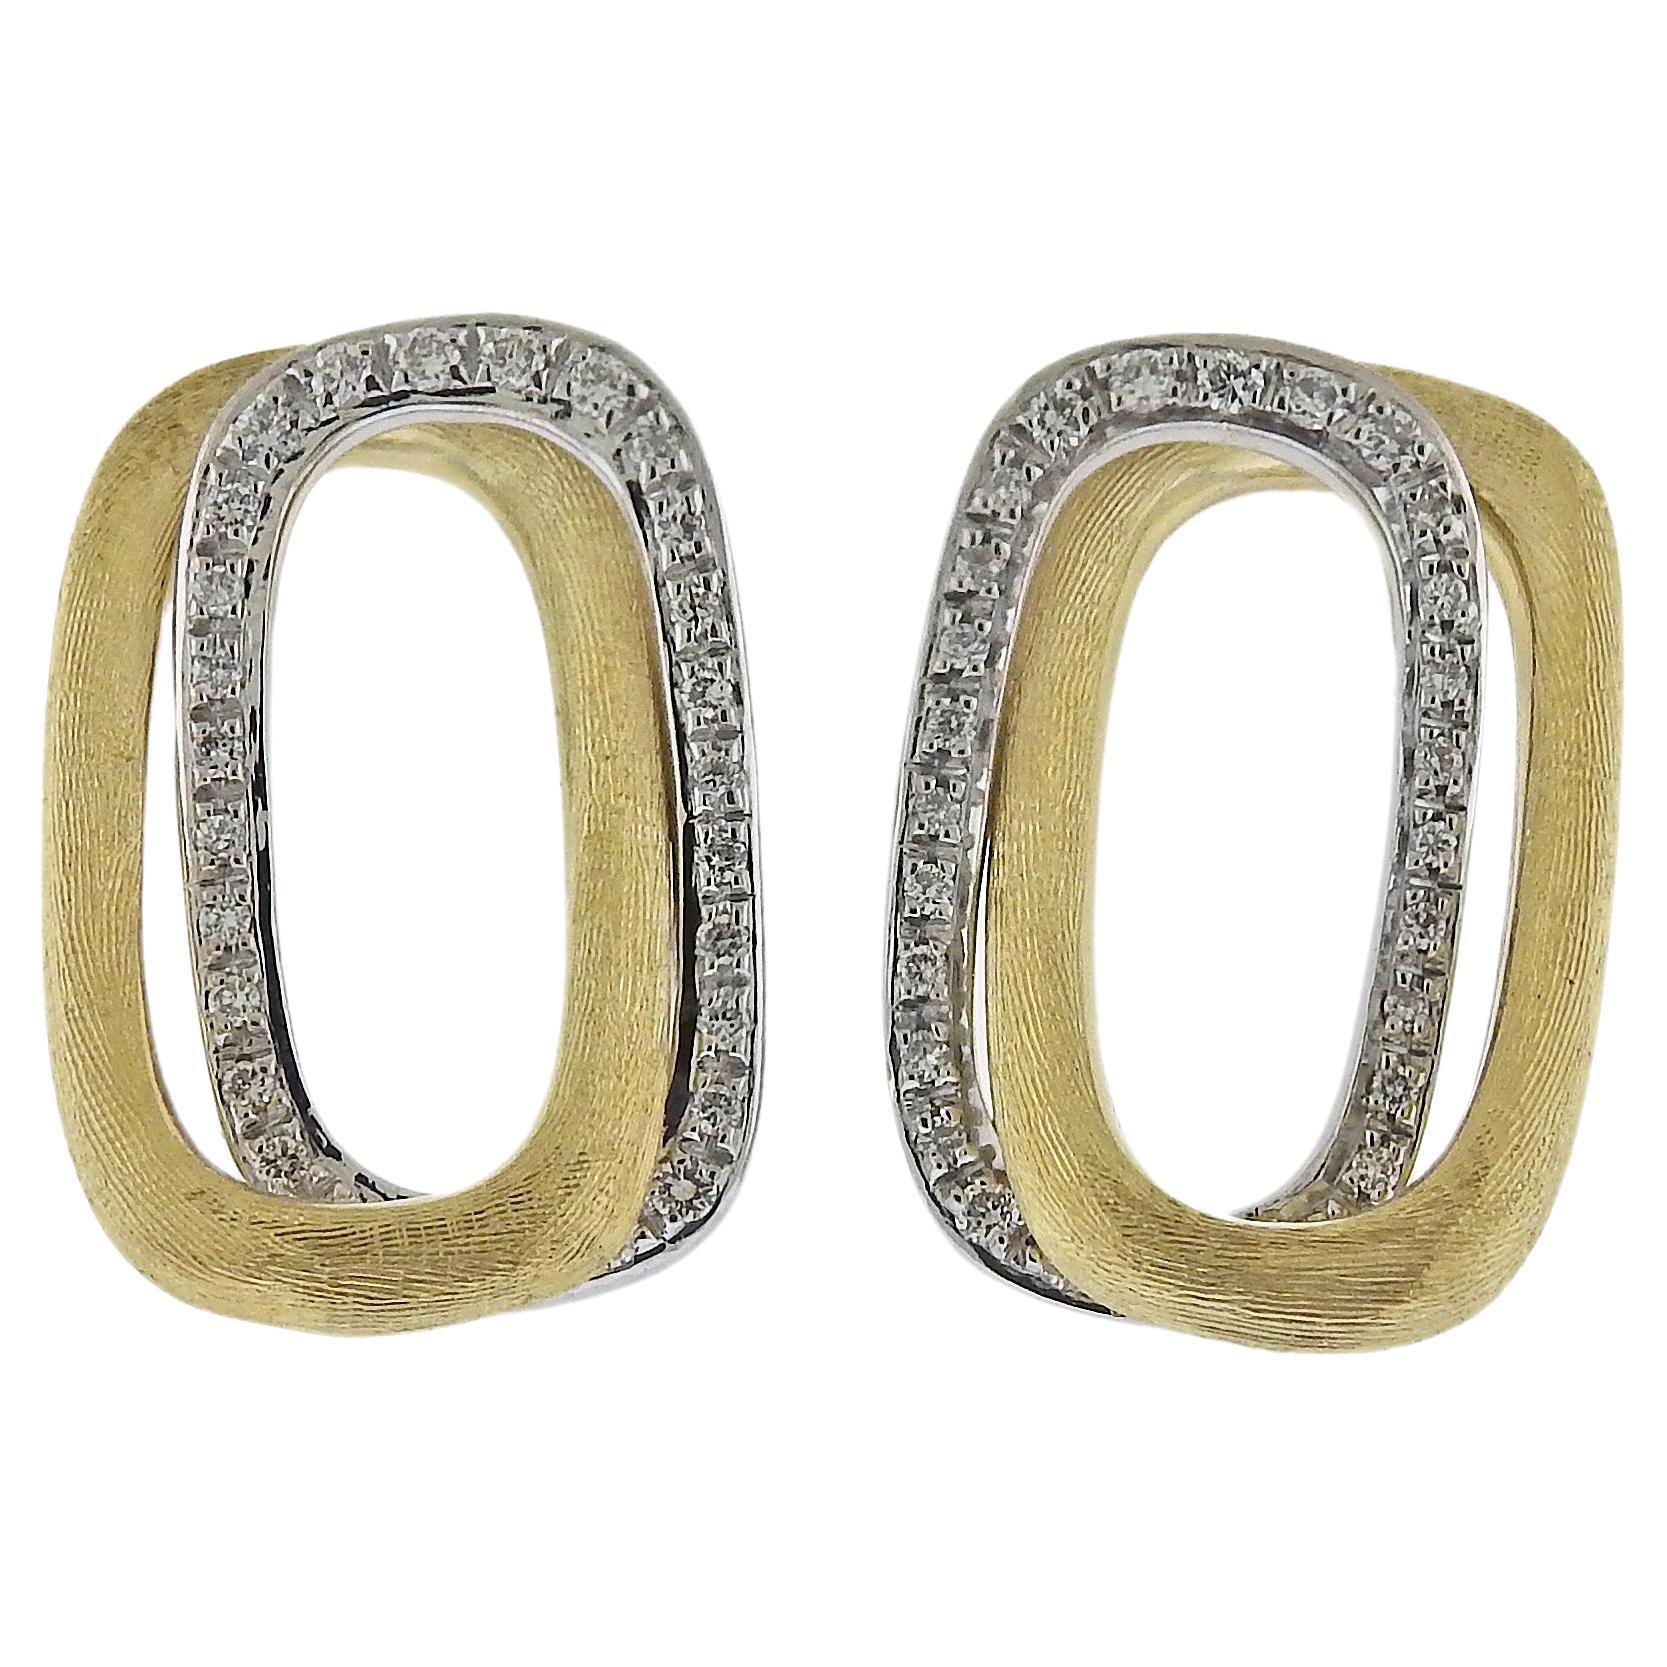 MarCo Bicego Murano Gold Diamond Link Stud Earrings For Sale